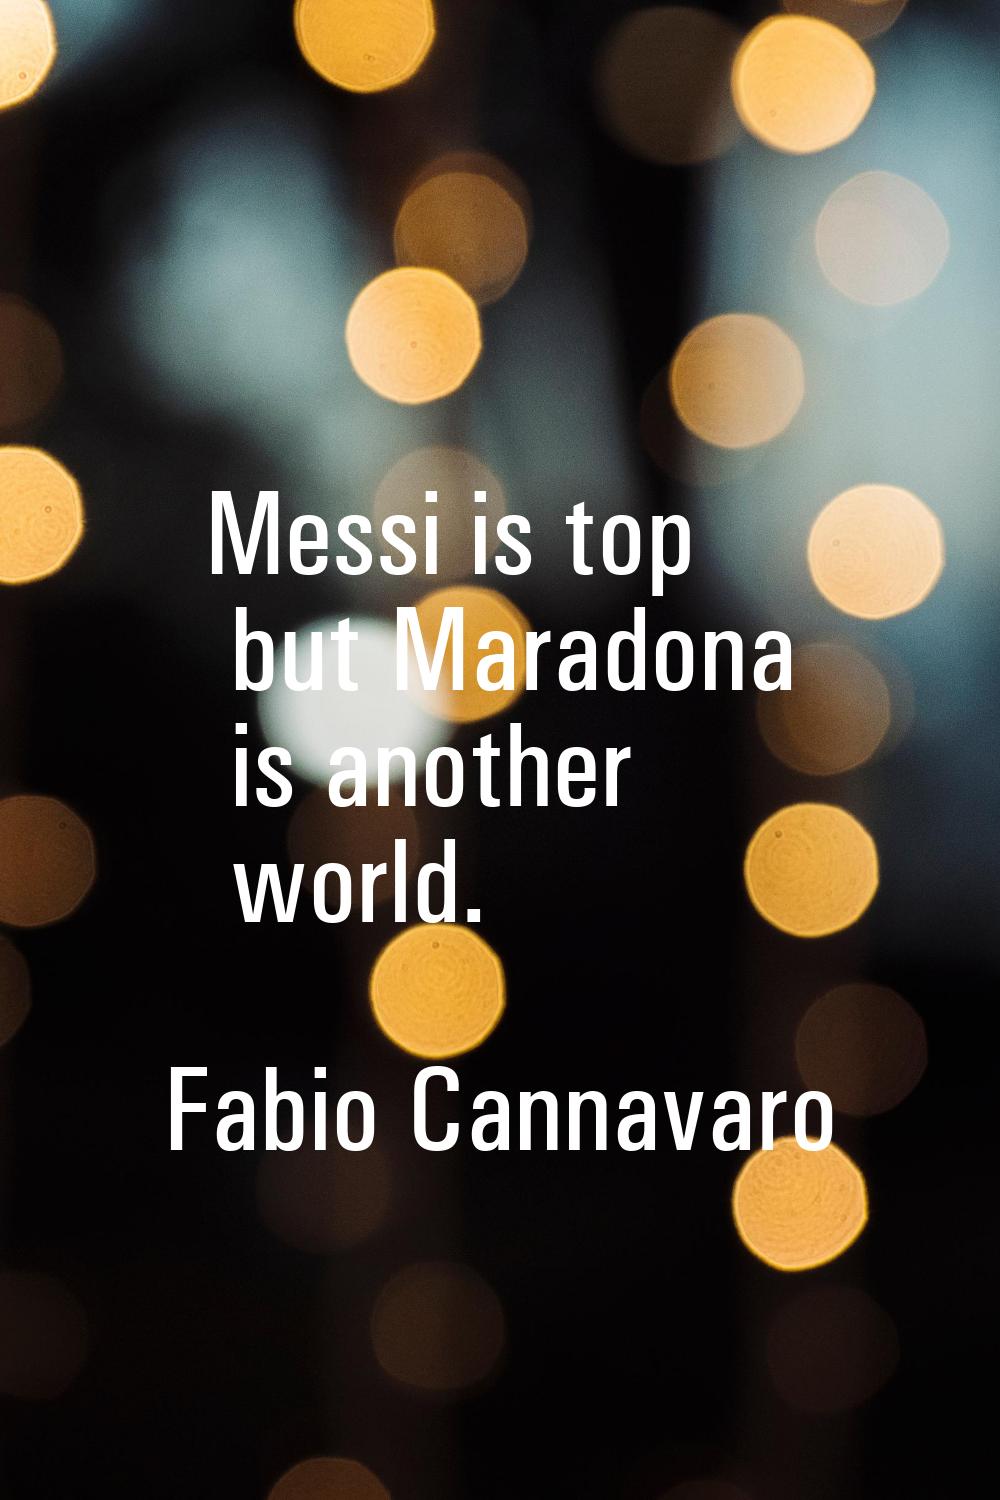 Messi is top but Maradona is another world.